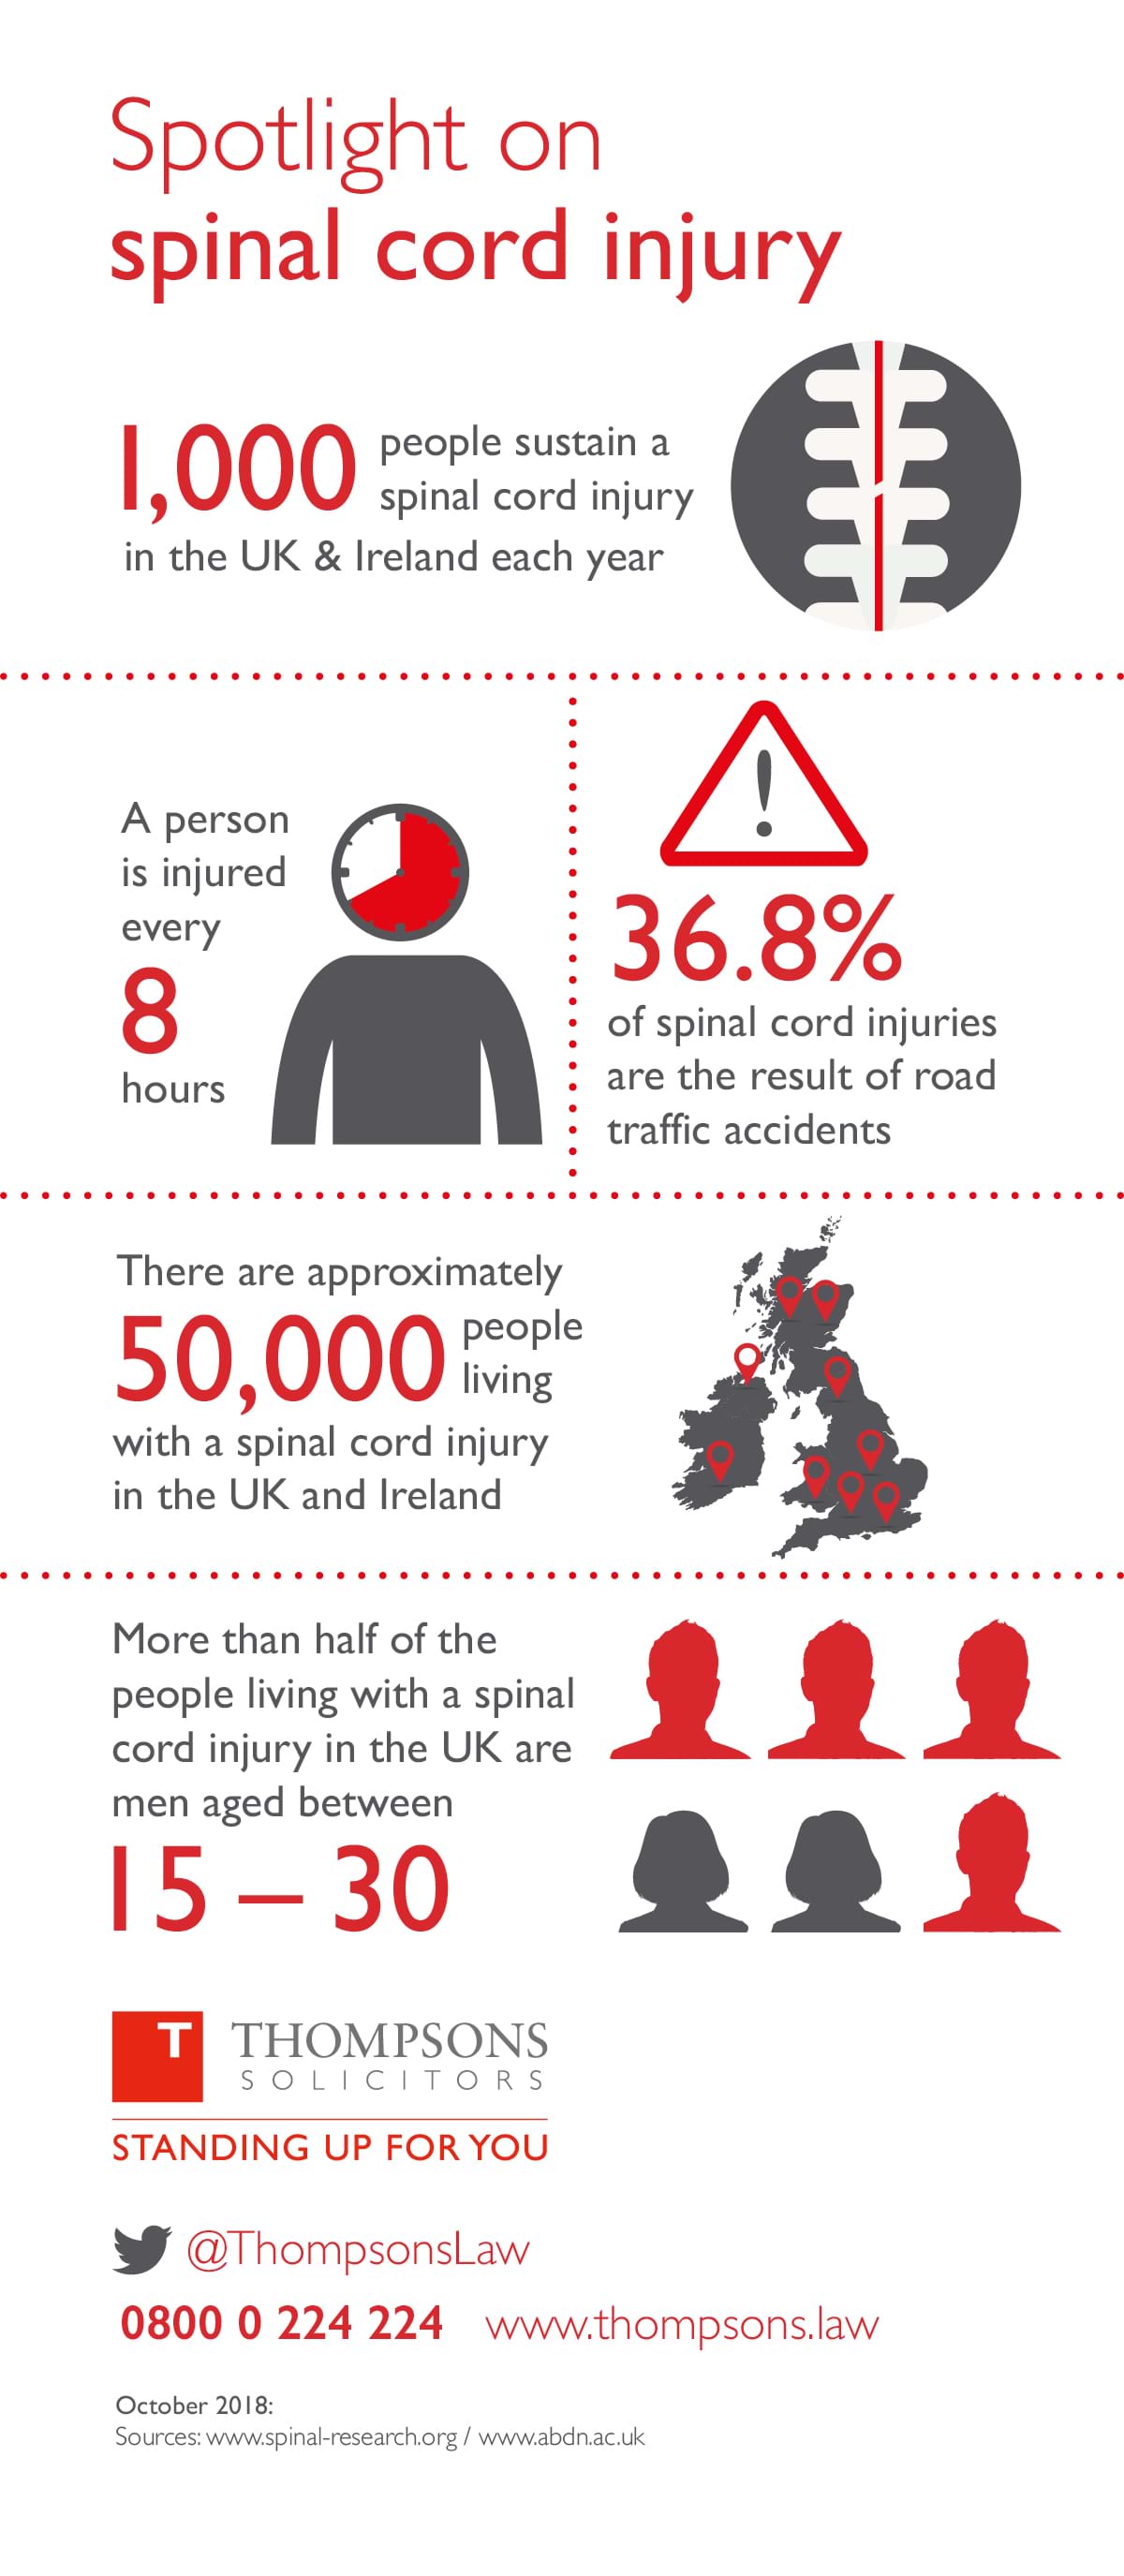 An infographic on the rate of spinal cord injury in the UK.